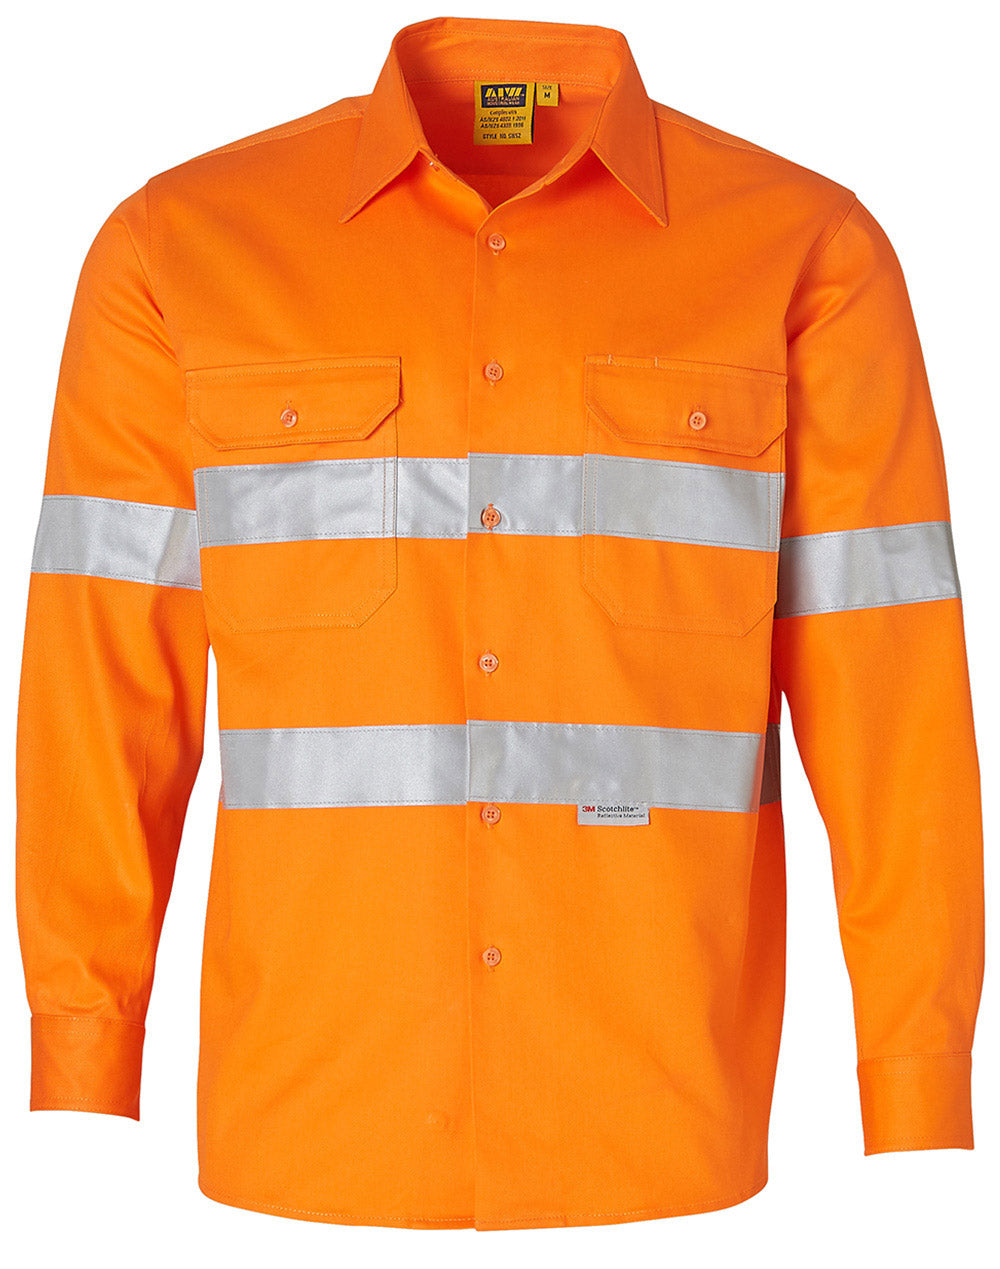 Orange Drill Long Sleeve Shirt With Tape - made by AIW